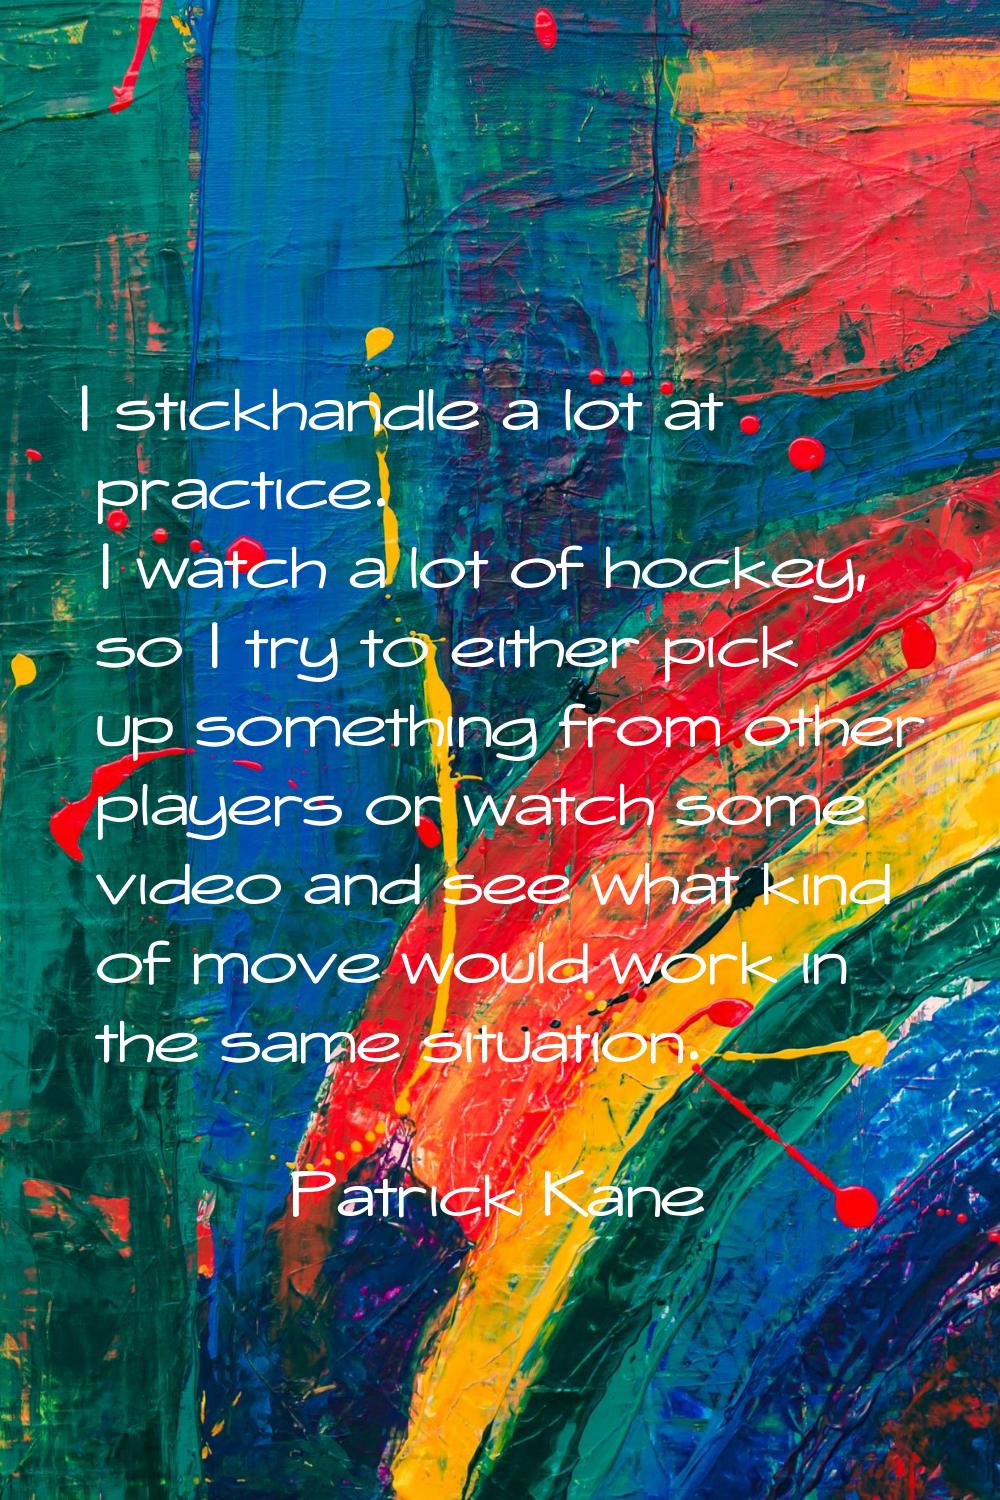 I stickhandle a lot at practice. I watch a lot of hockey, so I try to either pick up something from